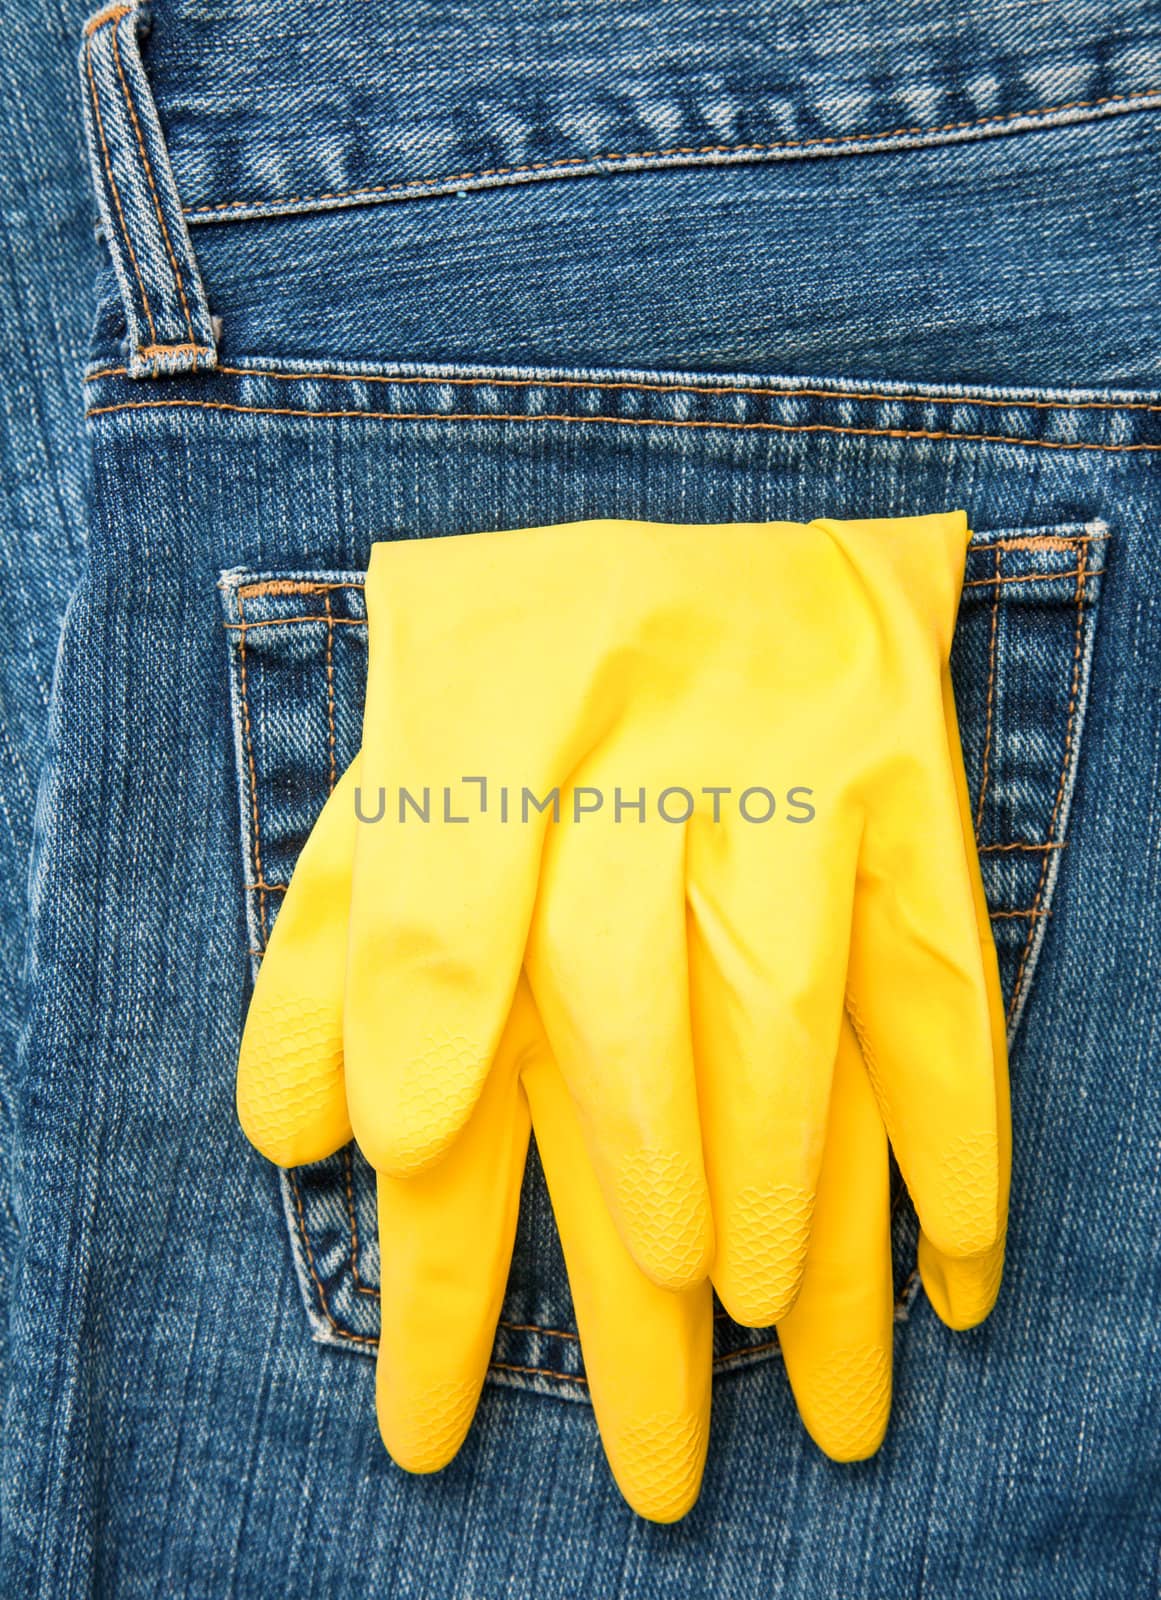 Blue jeans pocket with yellow protective gloves